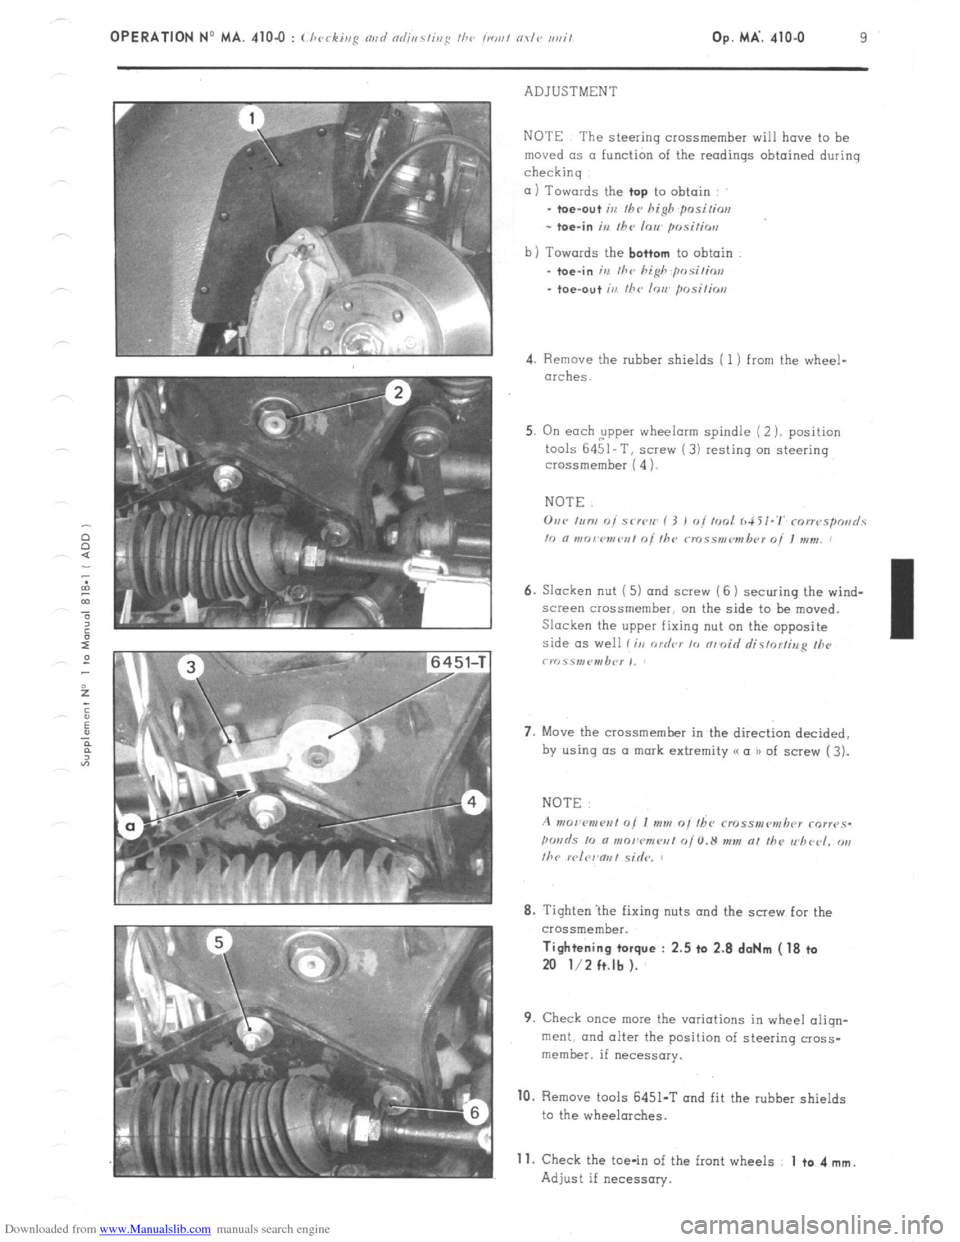 Citroen CX 1980 1.G Workshop Manual Downloaded from www.Manualslib.com manuals search engine OPERATION No MA. 4104 : (./ , k’  1<c a,,g I,<  n / nd;i,,s/i,,g I/><, jr.or,/ ovl<, ,,i,it Op. MA’. 410-O 9 
ADJUSTMENT 
NOTE The steering